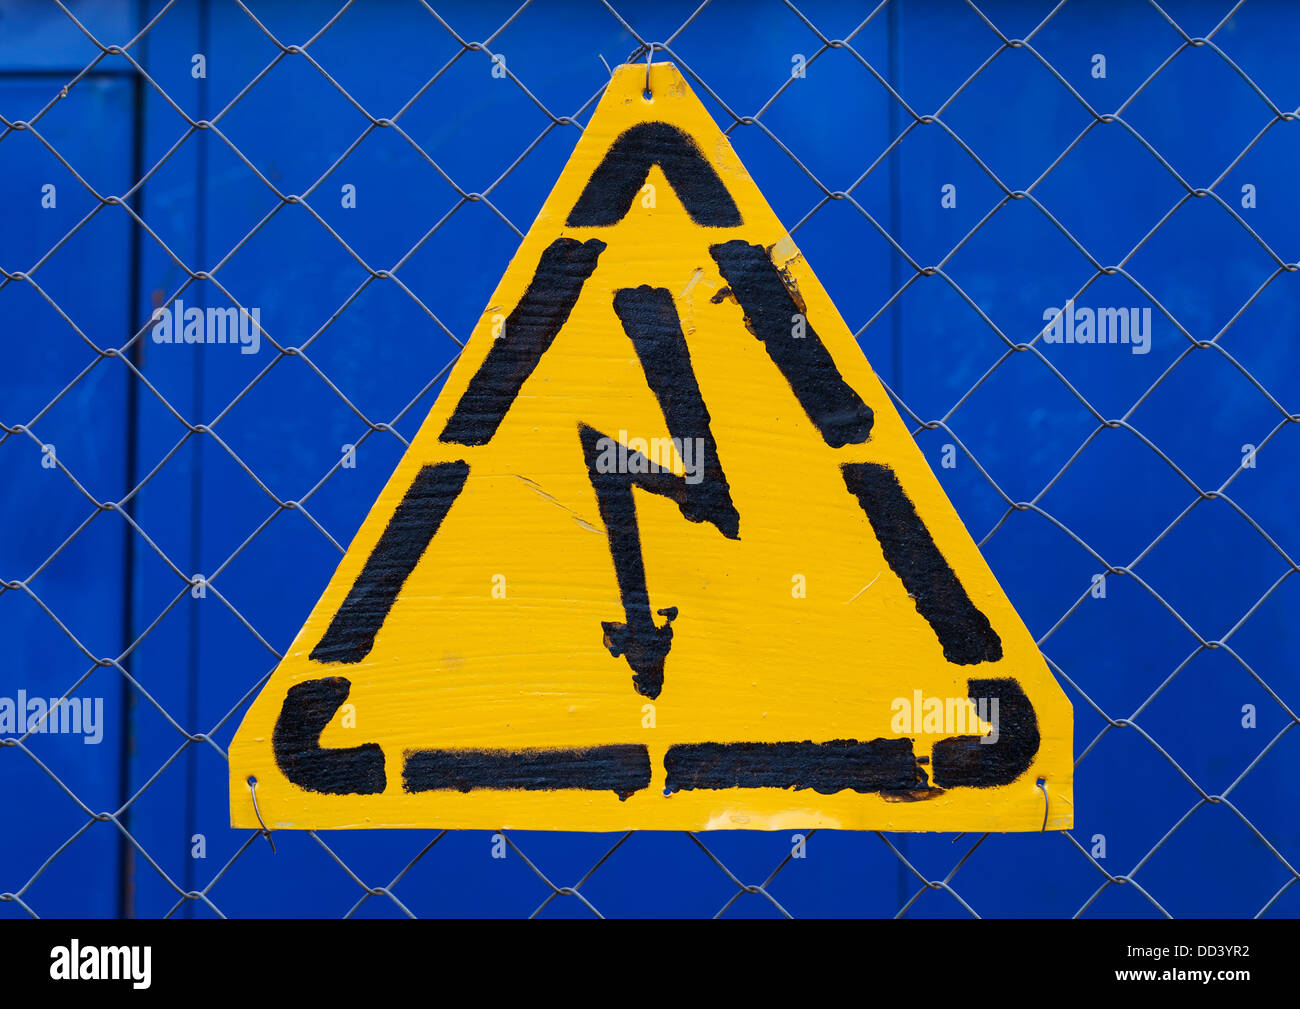 High voltage yellow sign mounted on blue metal rabitz grid Stock Photo